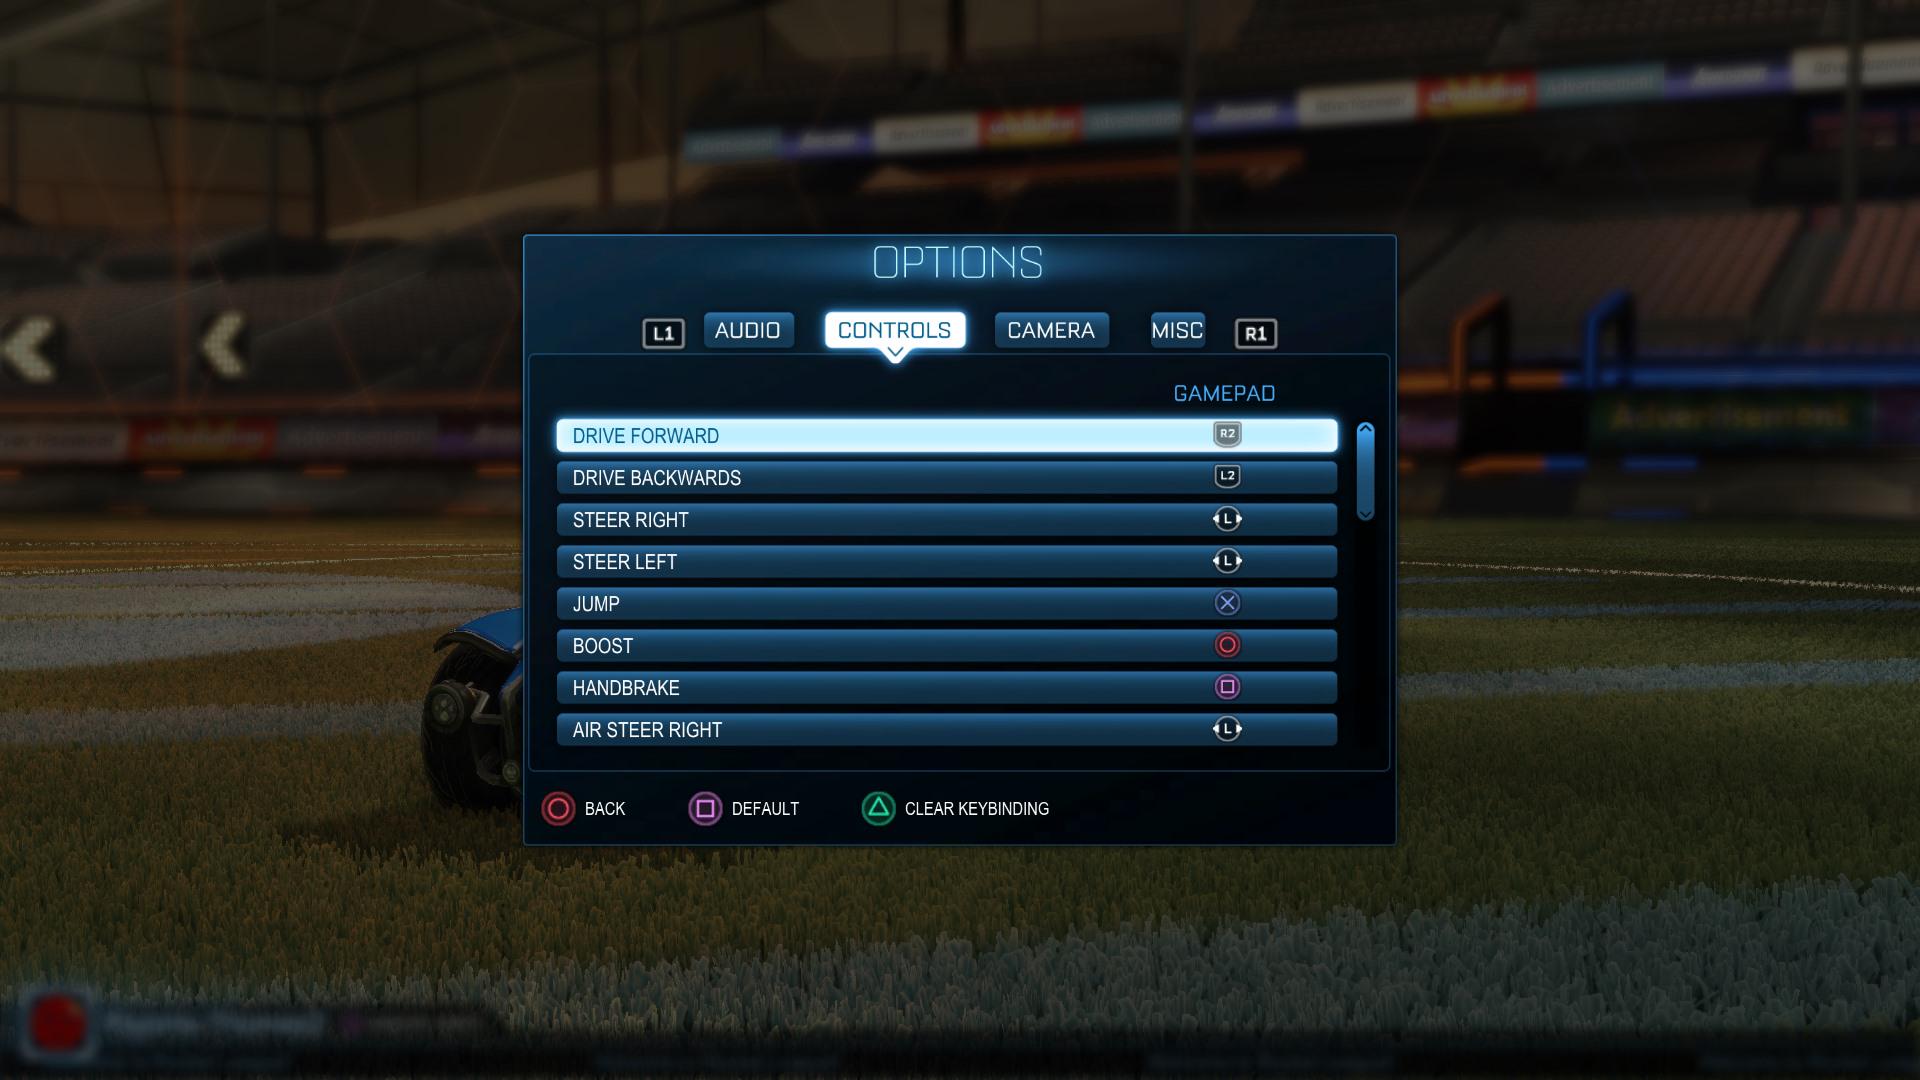 Rocket on Twitter: "Verified: WILL have FULLY-CUSTOMIZABLE controls in Rocket League for both PC PS4! Take a look! http://t.co/obSBtZTOxr" / Twitter